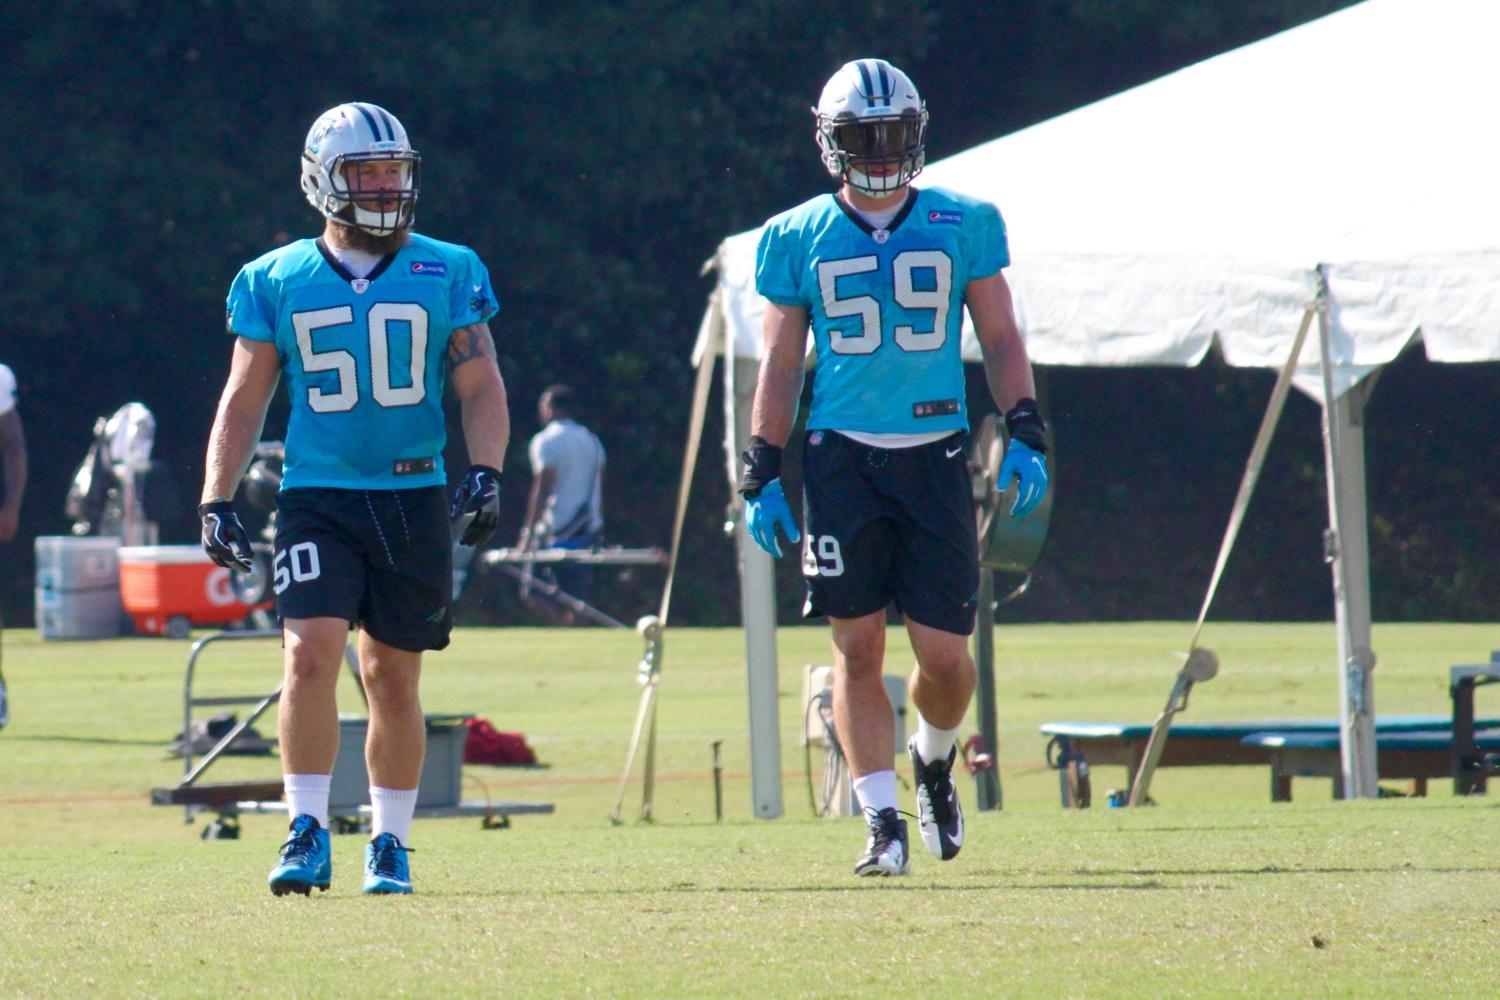 Ben Boulware, a former Clemson Tiger hoping to make the roster, seeks guidance from arguably the best middle linebacker in the league, Luke Kuechly.